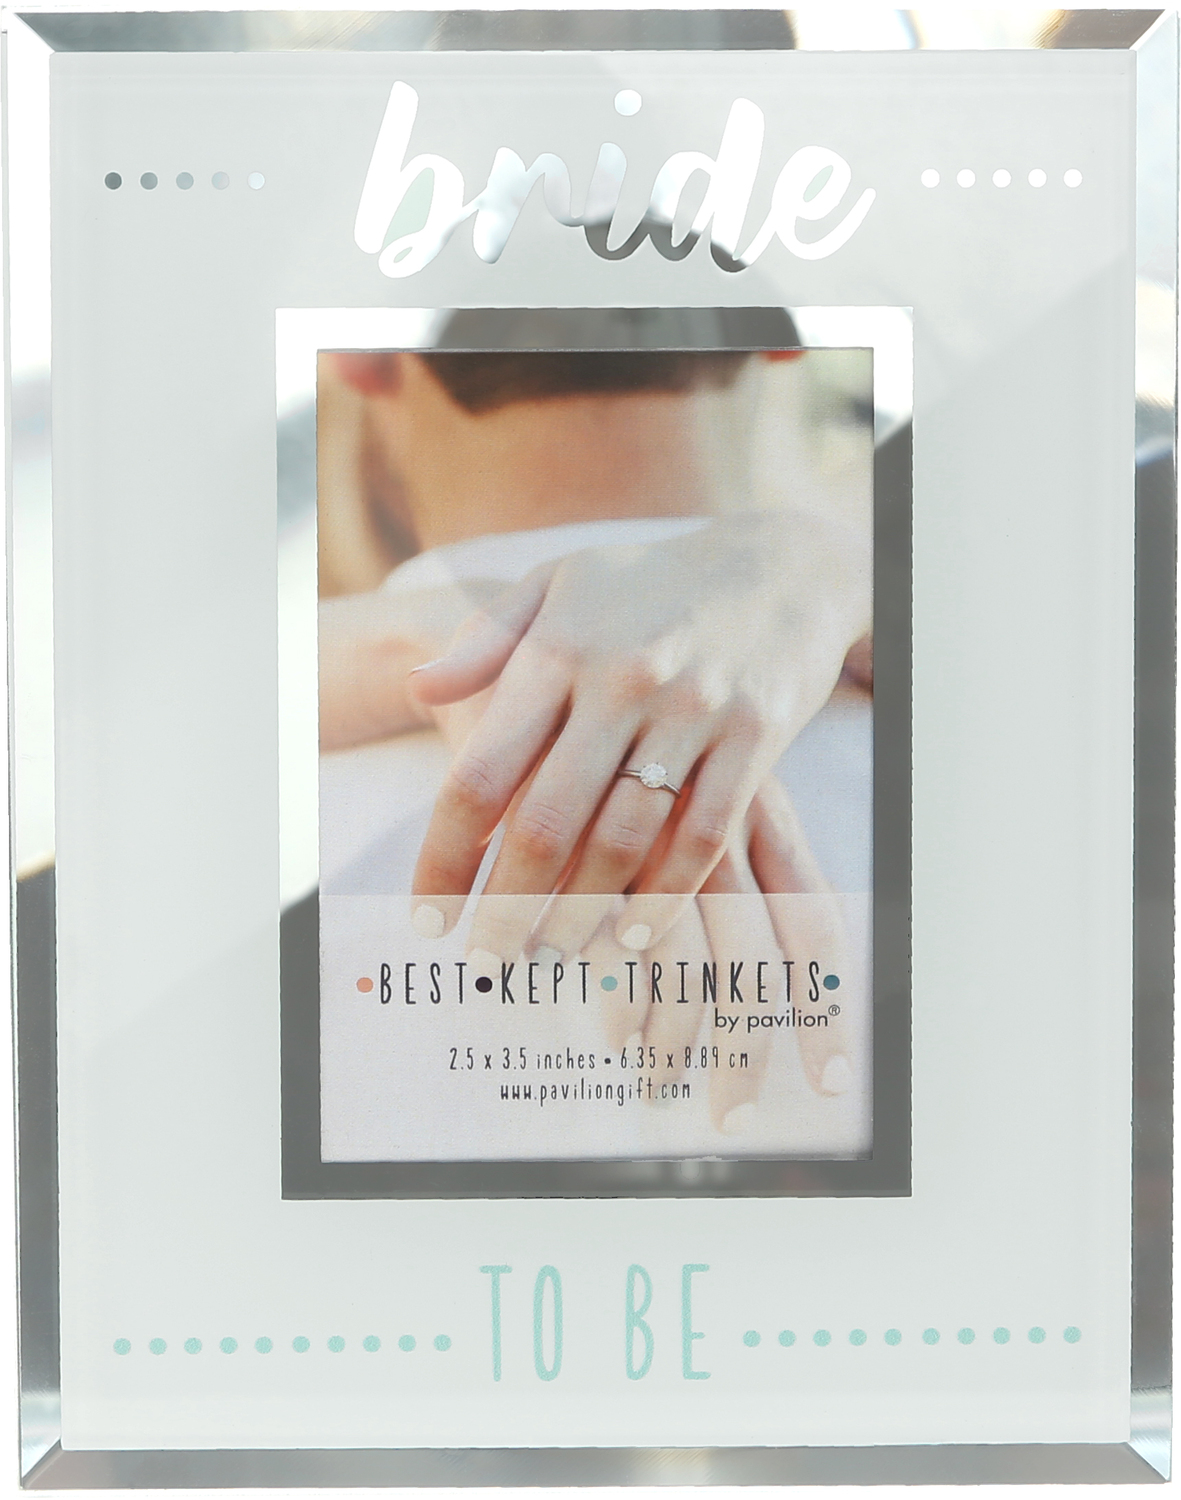 Bride by Best Kept Trinkets - Bride - 4.75" X 6" Frame
(Holds a 2.5" X 3.5" Photo)